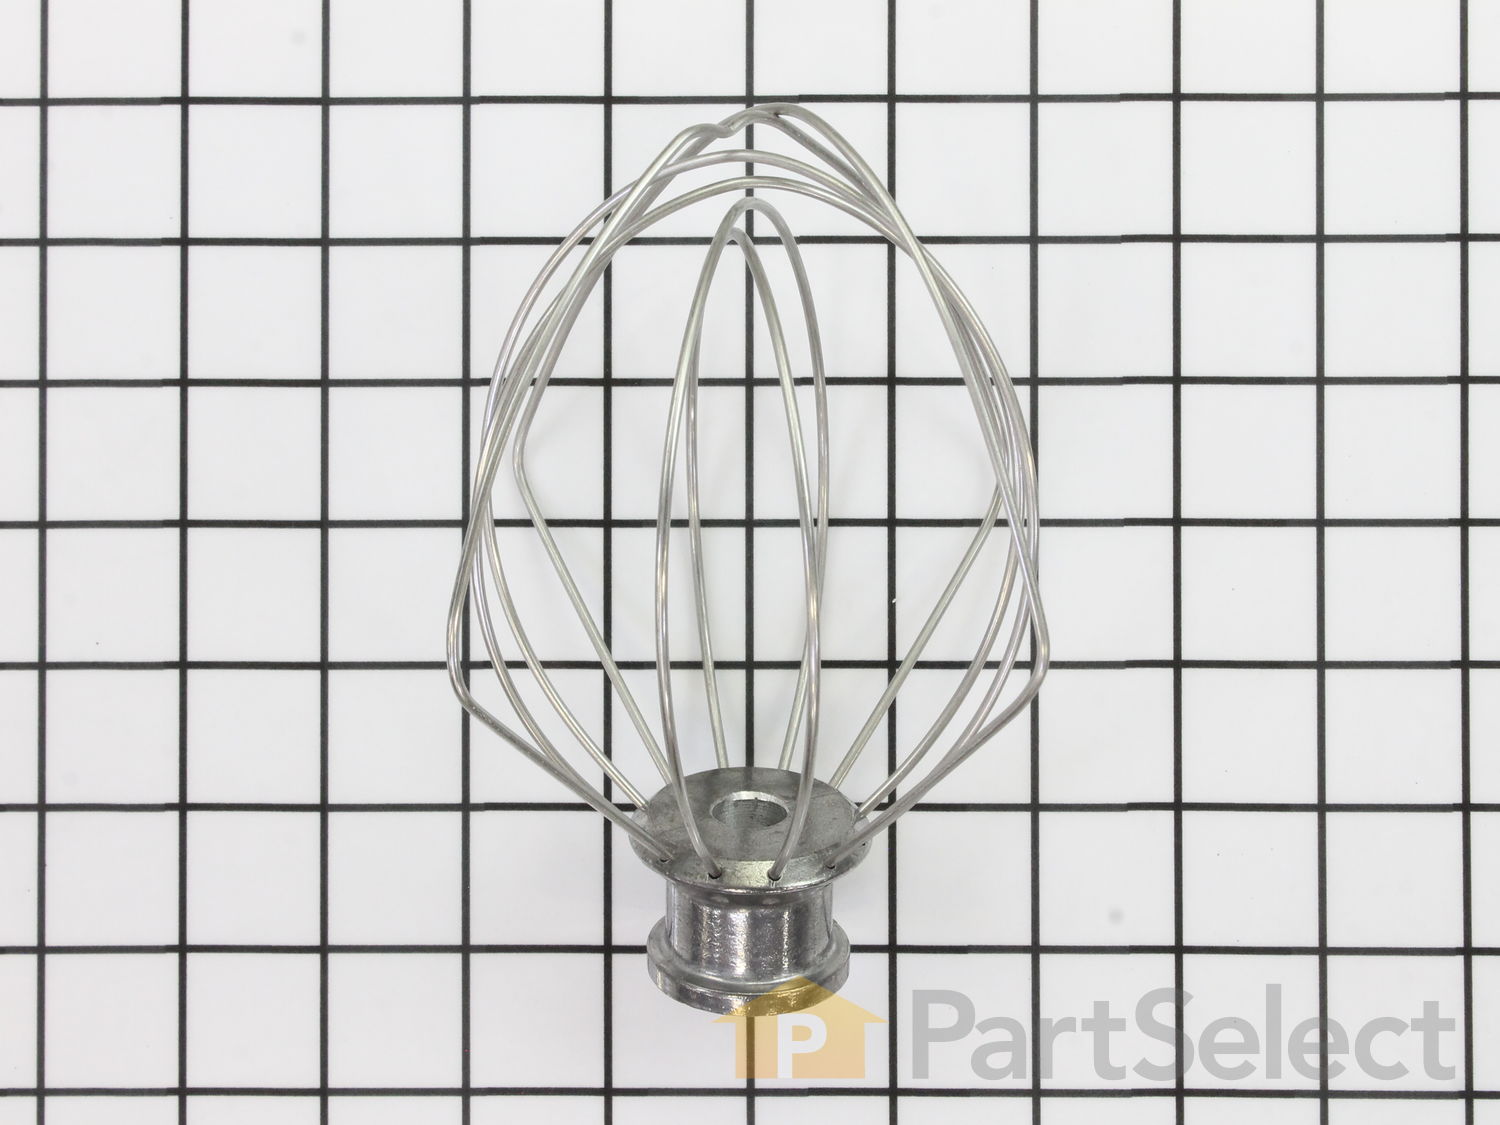 Stand Mixer Wire Whip WP9704329 - OEM KitchenAid 